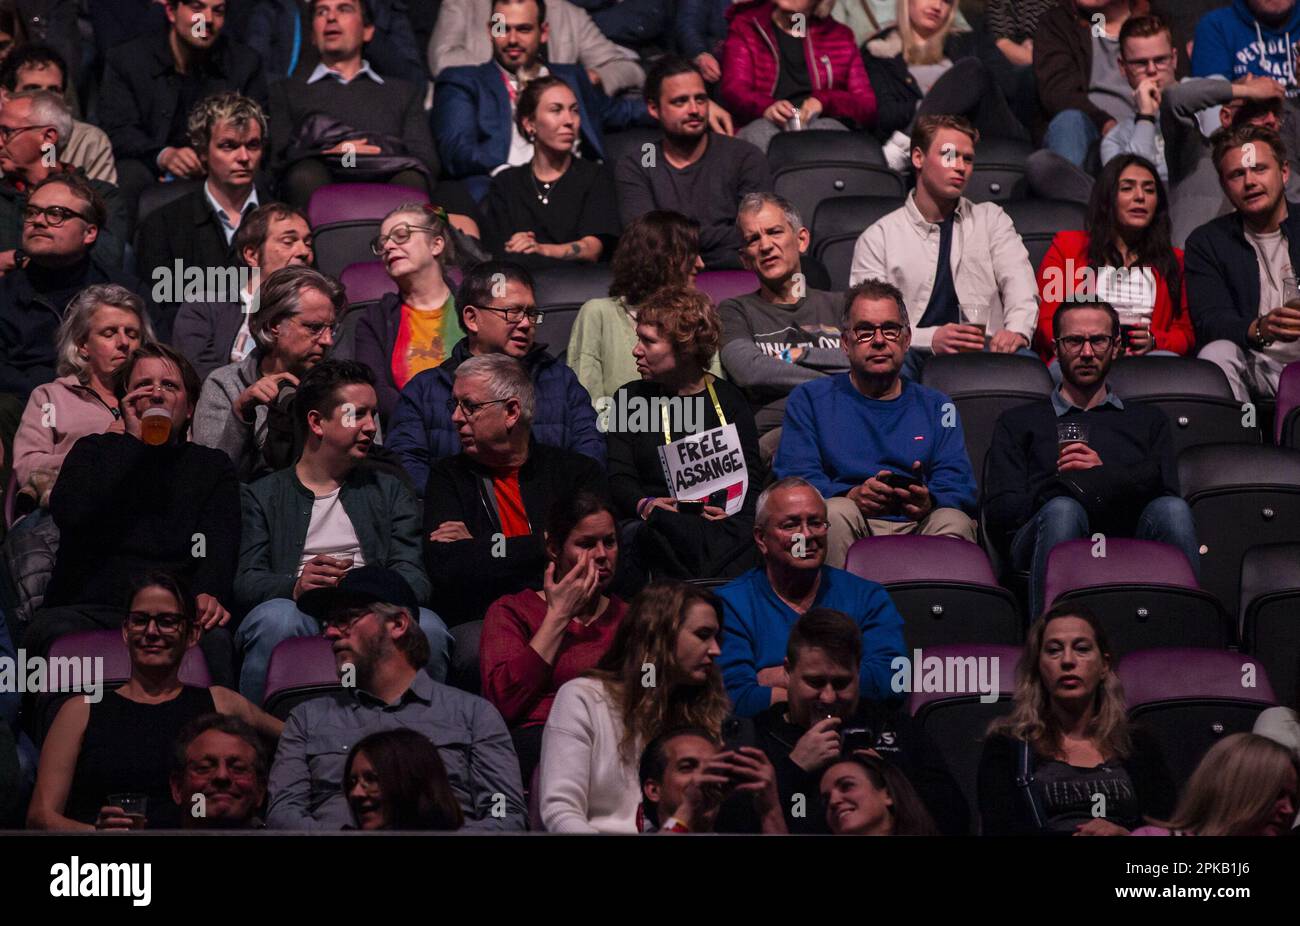 AMSTERDAM - A woman with a sign around her neck in the audience of the Ziggo Dome during Pink Floyd icon Roger Waters performance. ANP EVA PLEVIER netherlands out - belgium out Stock Photo